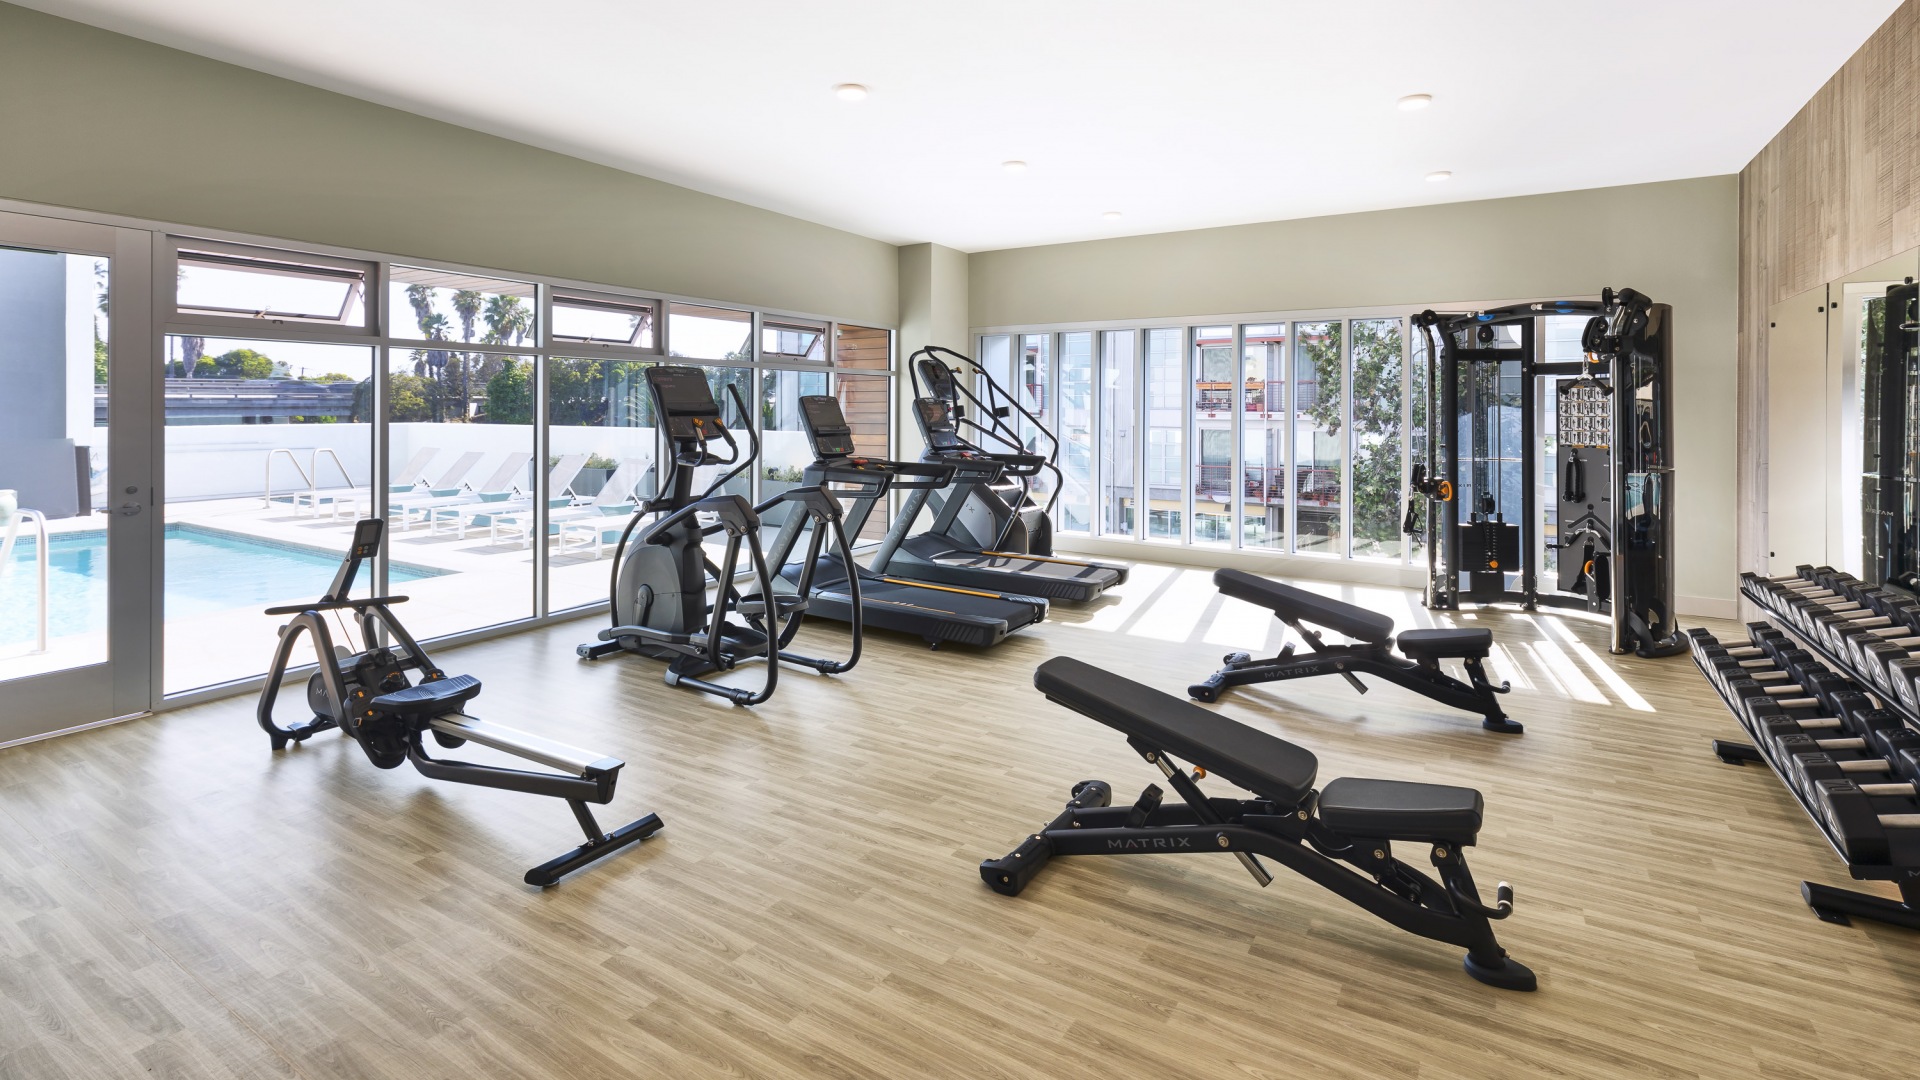 Fitness Studio with cardio and weights